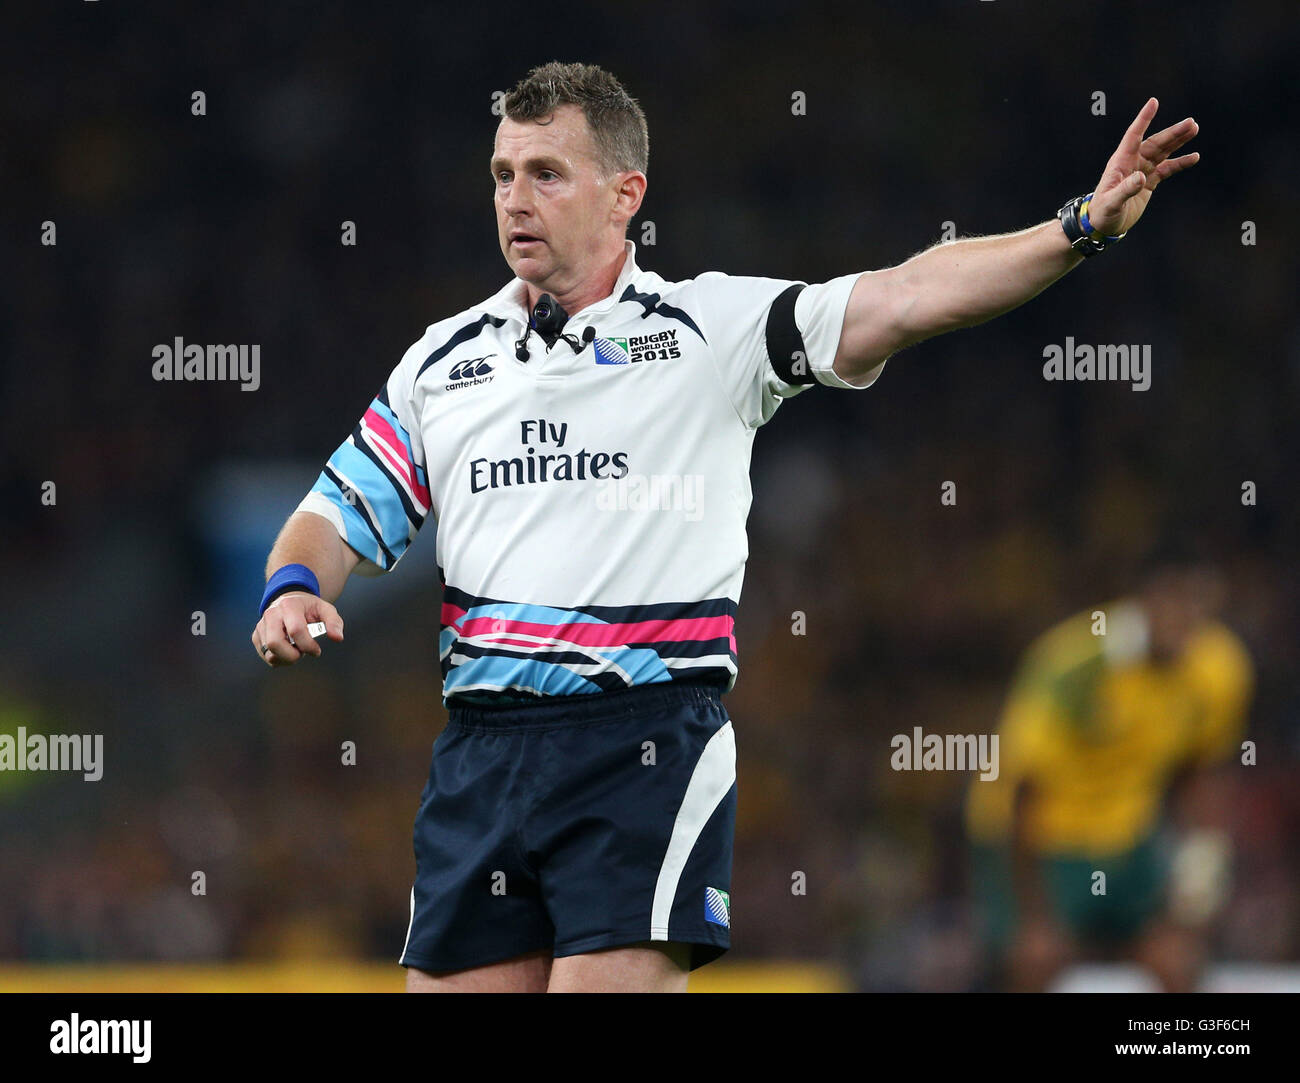 File photo dated 31/10/15 of Nigel Owens who has been awarded an MBE in the Queen's Birthday Honours for services to sport. Stock Photo